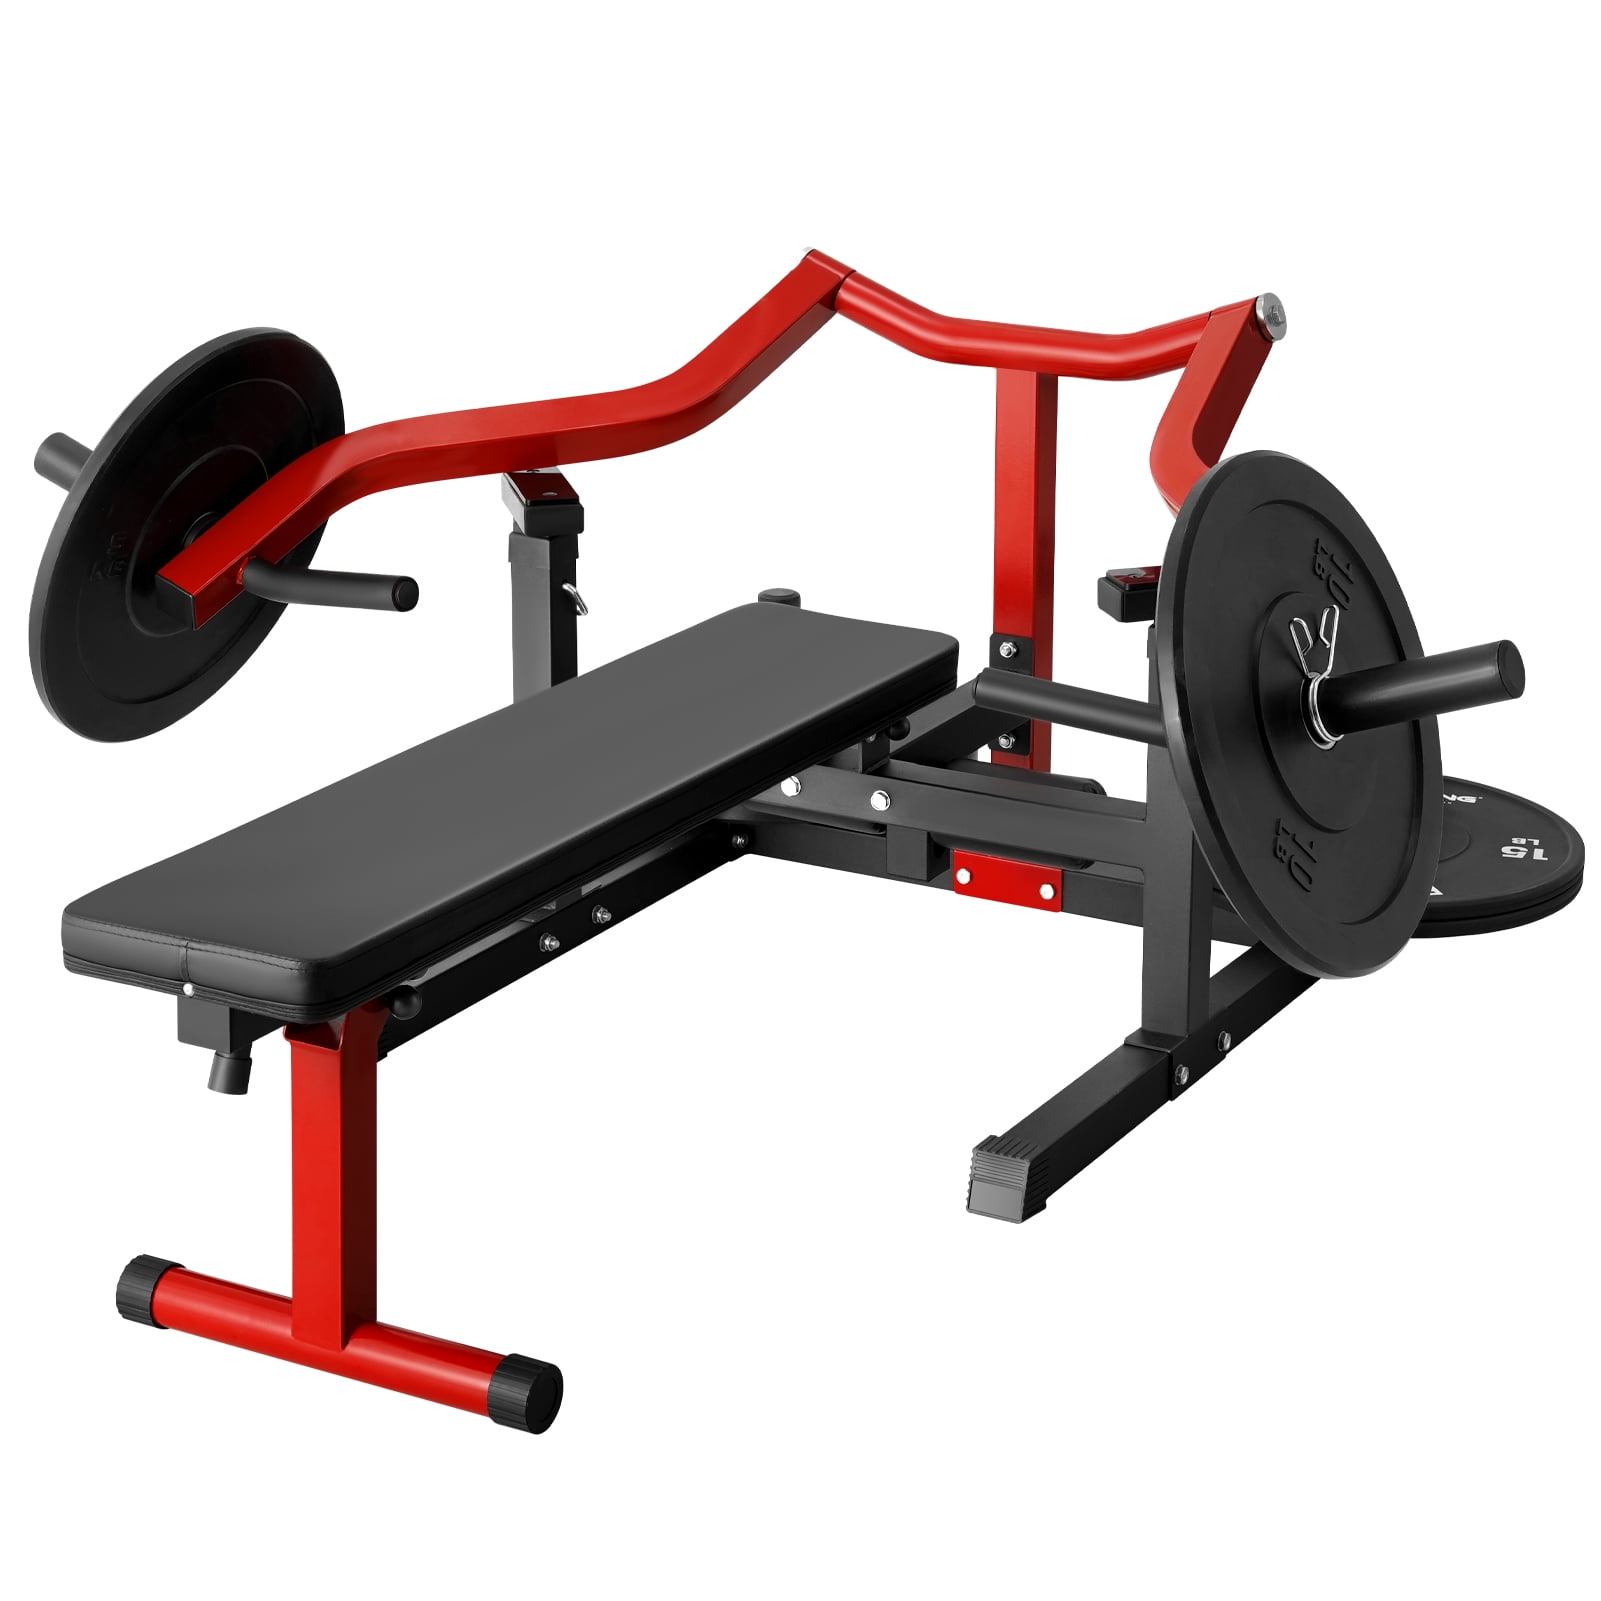 Syedee Chest Press Machine, 1250LBS Capacity with Independent Converging  Arms, Adjustable Flat Incline Bench for Home Gym